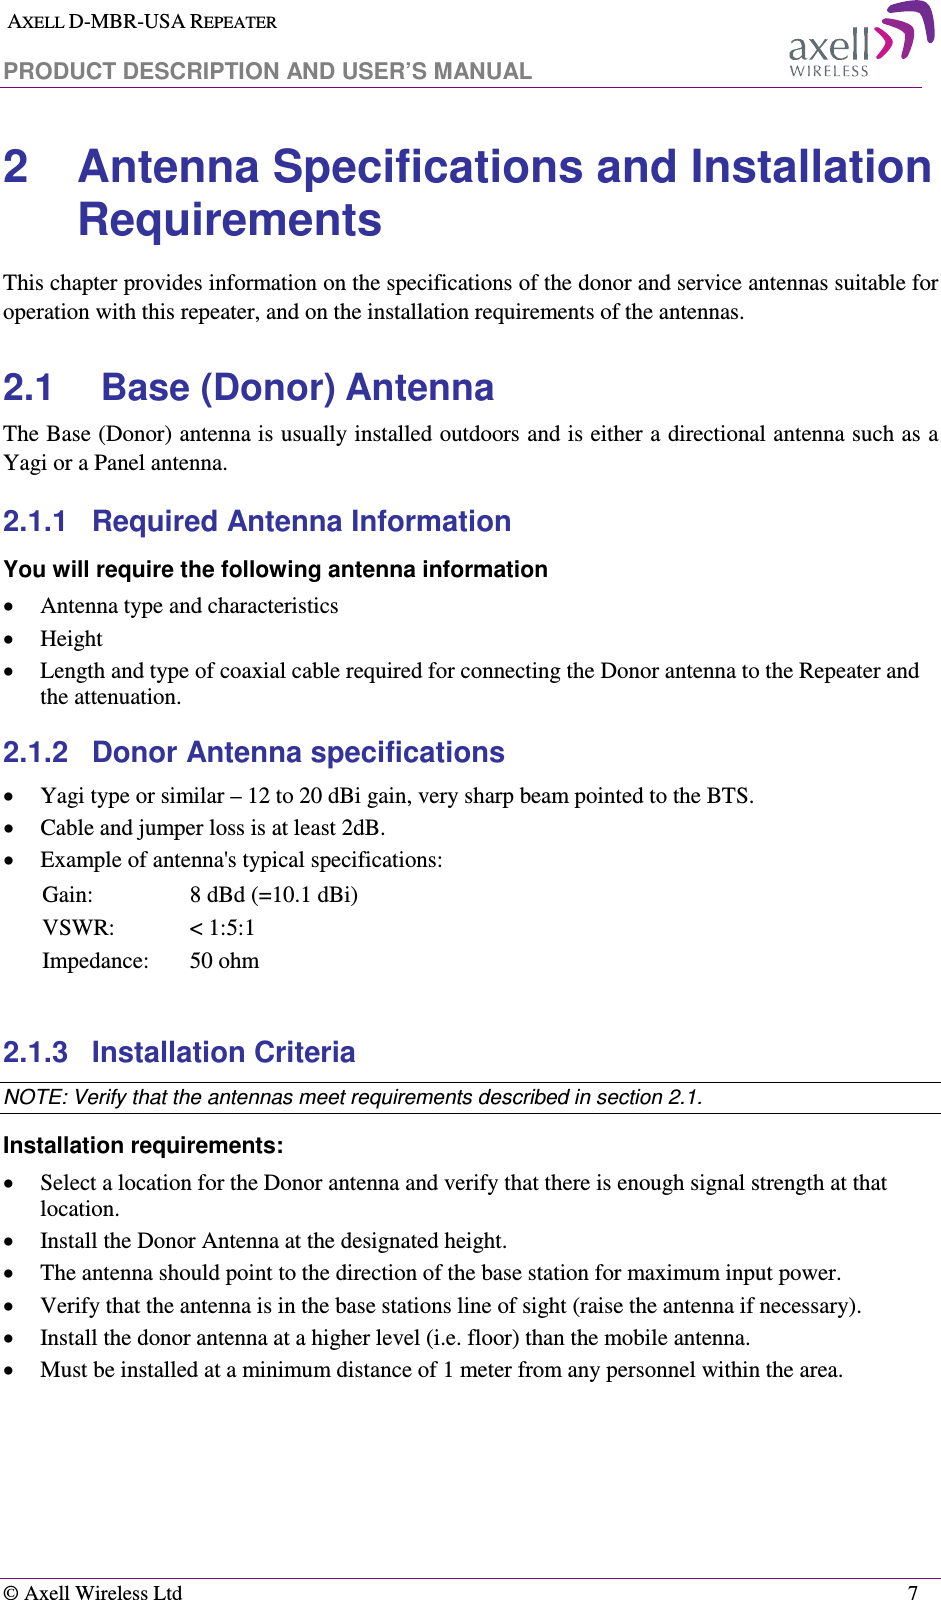  AXELL D-MBR-USA REPEATER  PRODUCT DESCRIPTION AND USER’S MANUAL   © Axell Wireless Ltd    7 2  Antenna Specifications and Installation Requirements This chapter provides information on the specifications of the donor and service antennas suitable for operation with this repeater, and on the installation requirements of the antennas. 2.1  Base (Donor) Antenna  The Base (Donor) antenna is usually installed outdoors and is either a directional antenna such as a Yagi or a Panel antenna.  2.1.1  Required Antenna Information You will require the following antenna information • Antenna type and characteristics • Height • Length and type of coaxial cable required for connecting the Donor antenna to the Repeater and the attenuation. 2.1.2  Donor Antenna specifications • Yagi type or similar – 12 to 20 dBi gain, very sharp beam pointed to the BTS. • Cable and jumper loss is at least 2dB. • Example of antenna&apos;s typical specifications:  Gain:  8 dBd (=10.1 dBi) VSWR:  &lt; 1:5:1 Impedance:  50 ohm  2.1.3  Installation Criteria  NOTE: Verify that the antennas meet requirements described in section  2.1. Installation requirements: • Select a location for the Donor antenna and verify that there is enough signal strength at that location. • Install the Donor Antenna at the designated height. • The antenna should point to the direction of the base station for maximum input power. • Verify that the antenna is in the base stations line of sight (raise the antenna if necessary).  • Install the donor antenna at a higher level (i.e. floor) than the mobile antenna. • Must be installed at a minimum distance of 1 meter from any personnel within the area. 